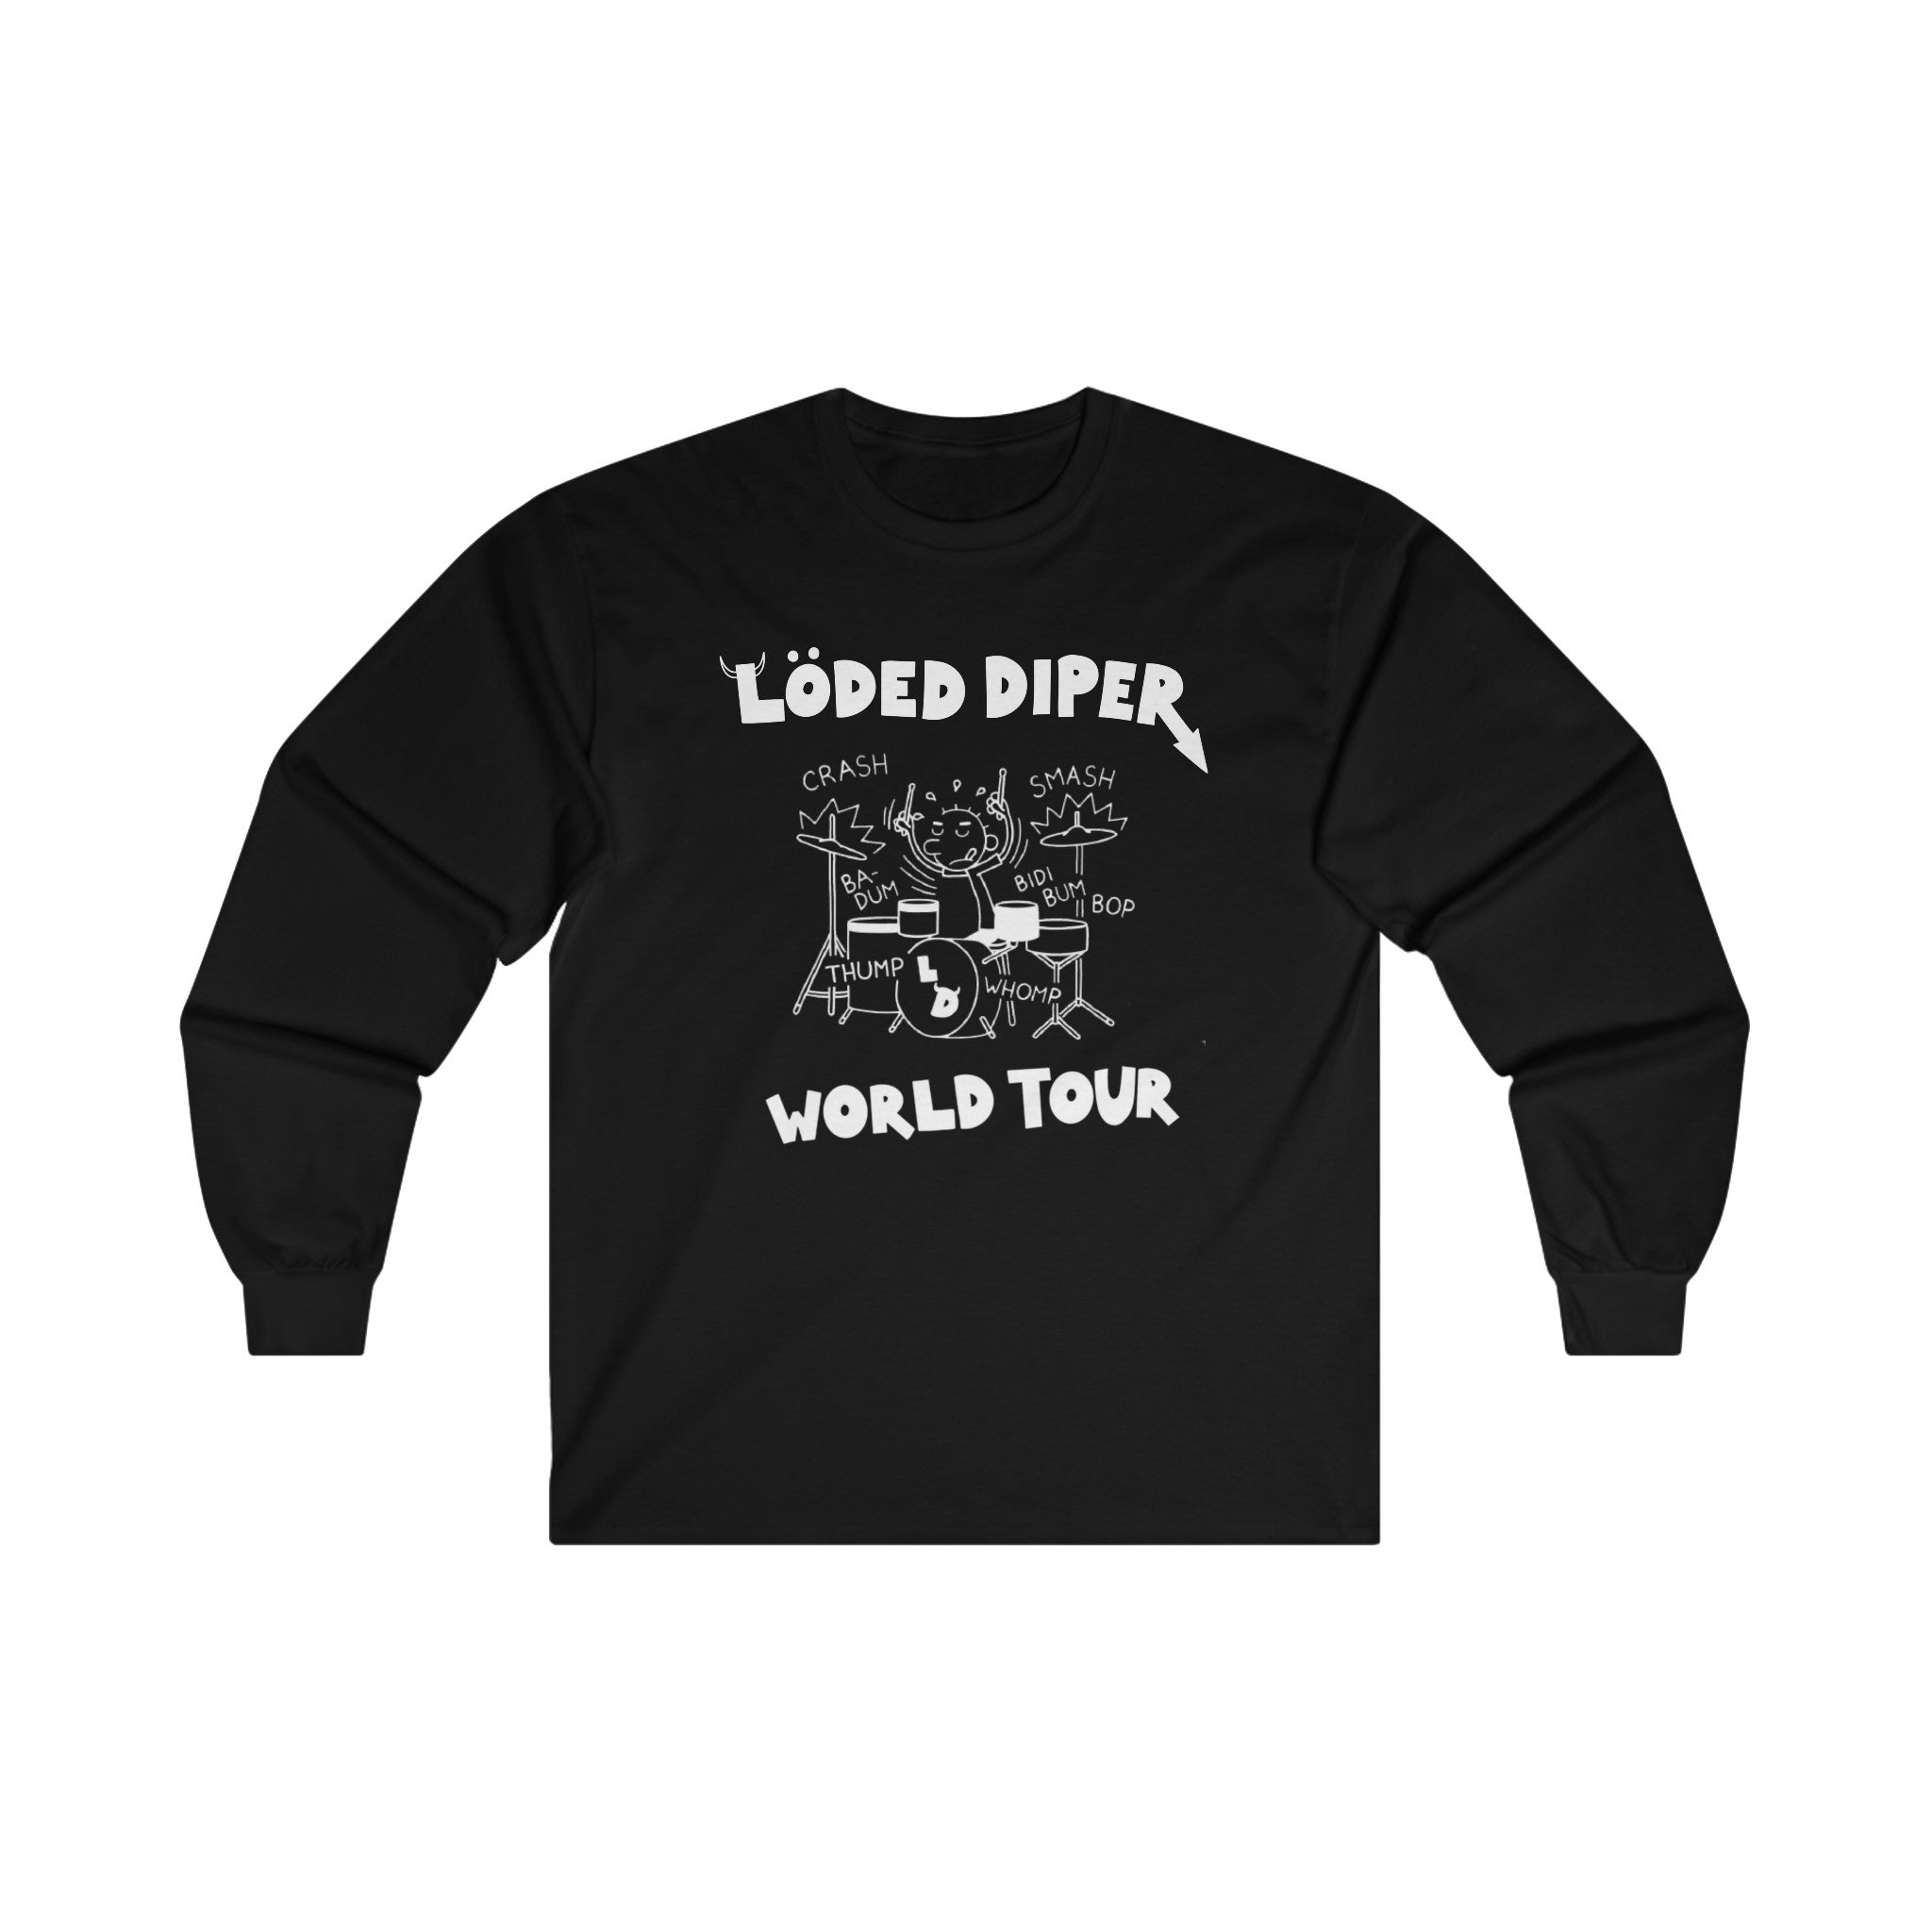 Loded Diper World Tour - Ultra Cotton Long Sleeve Tee - All Colors